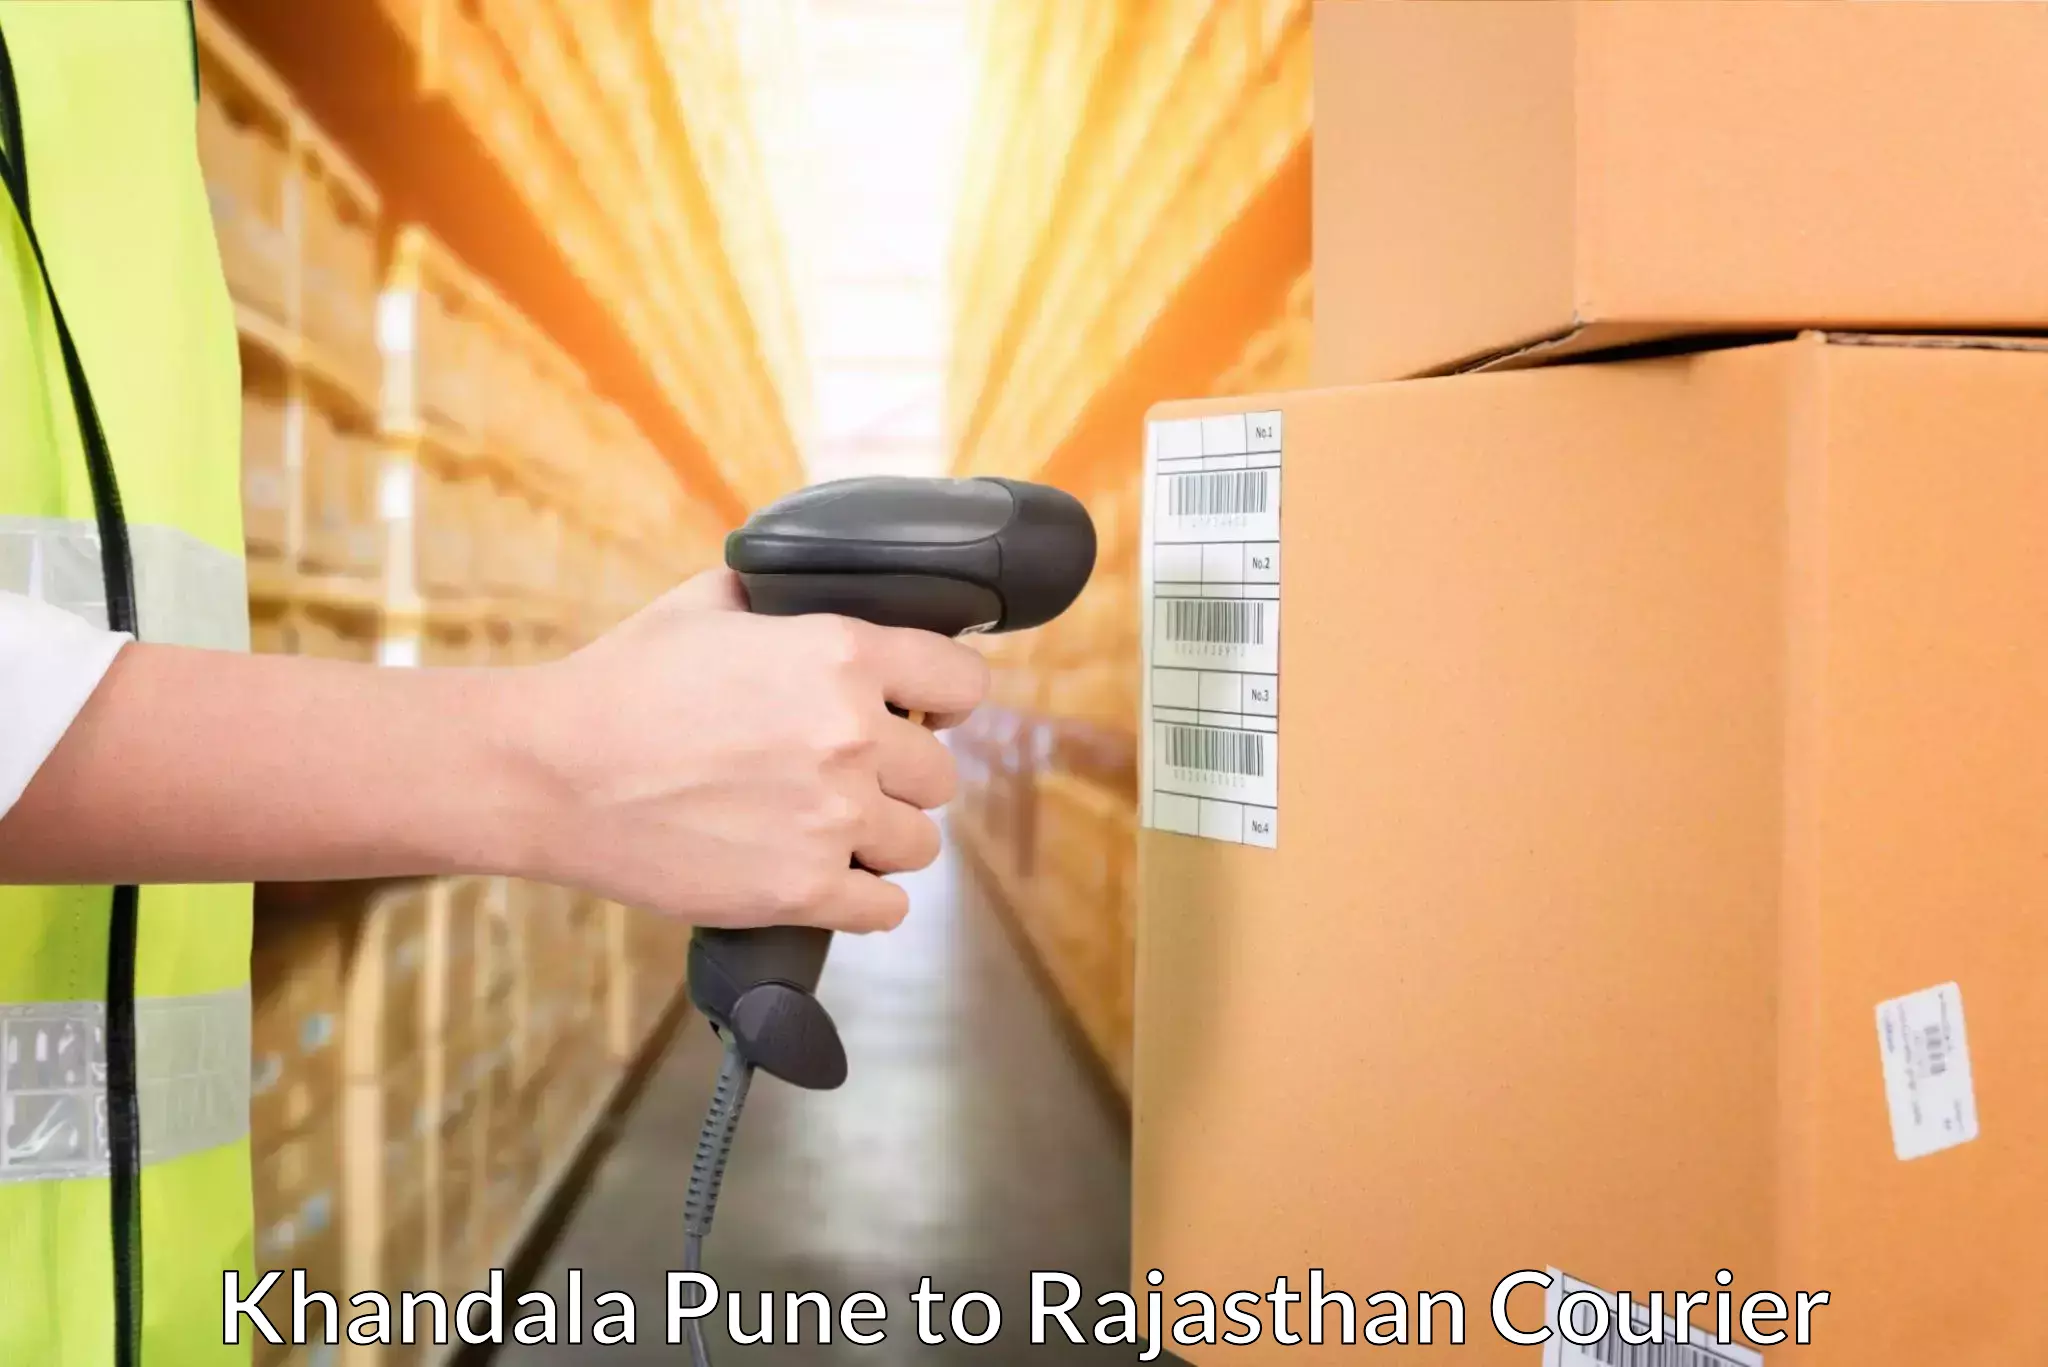 Nationwide courier service Khandala Pune to Rajasthan